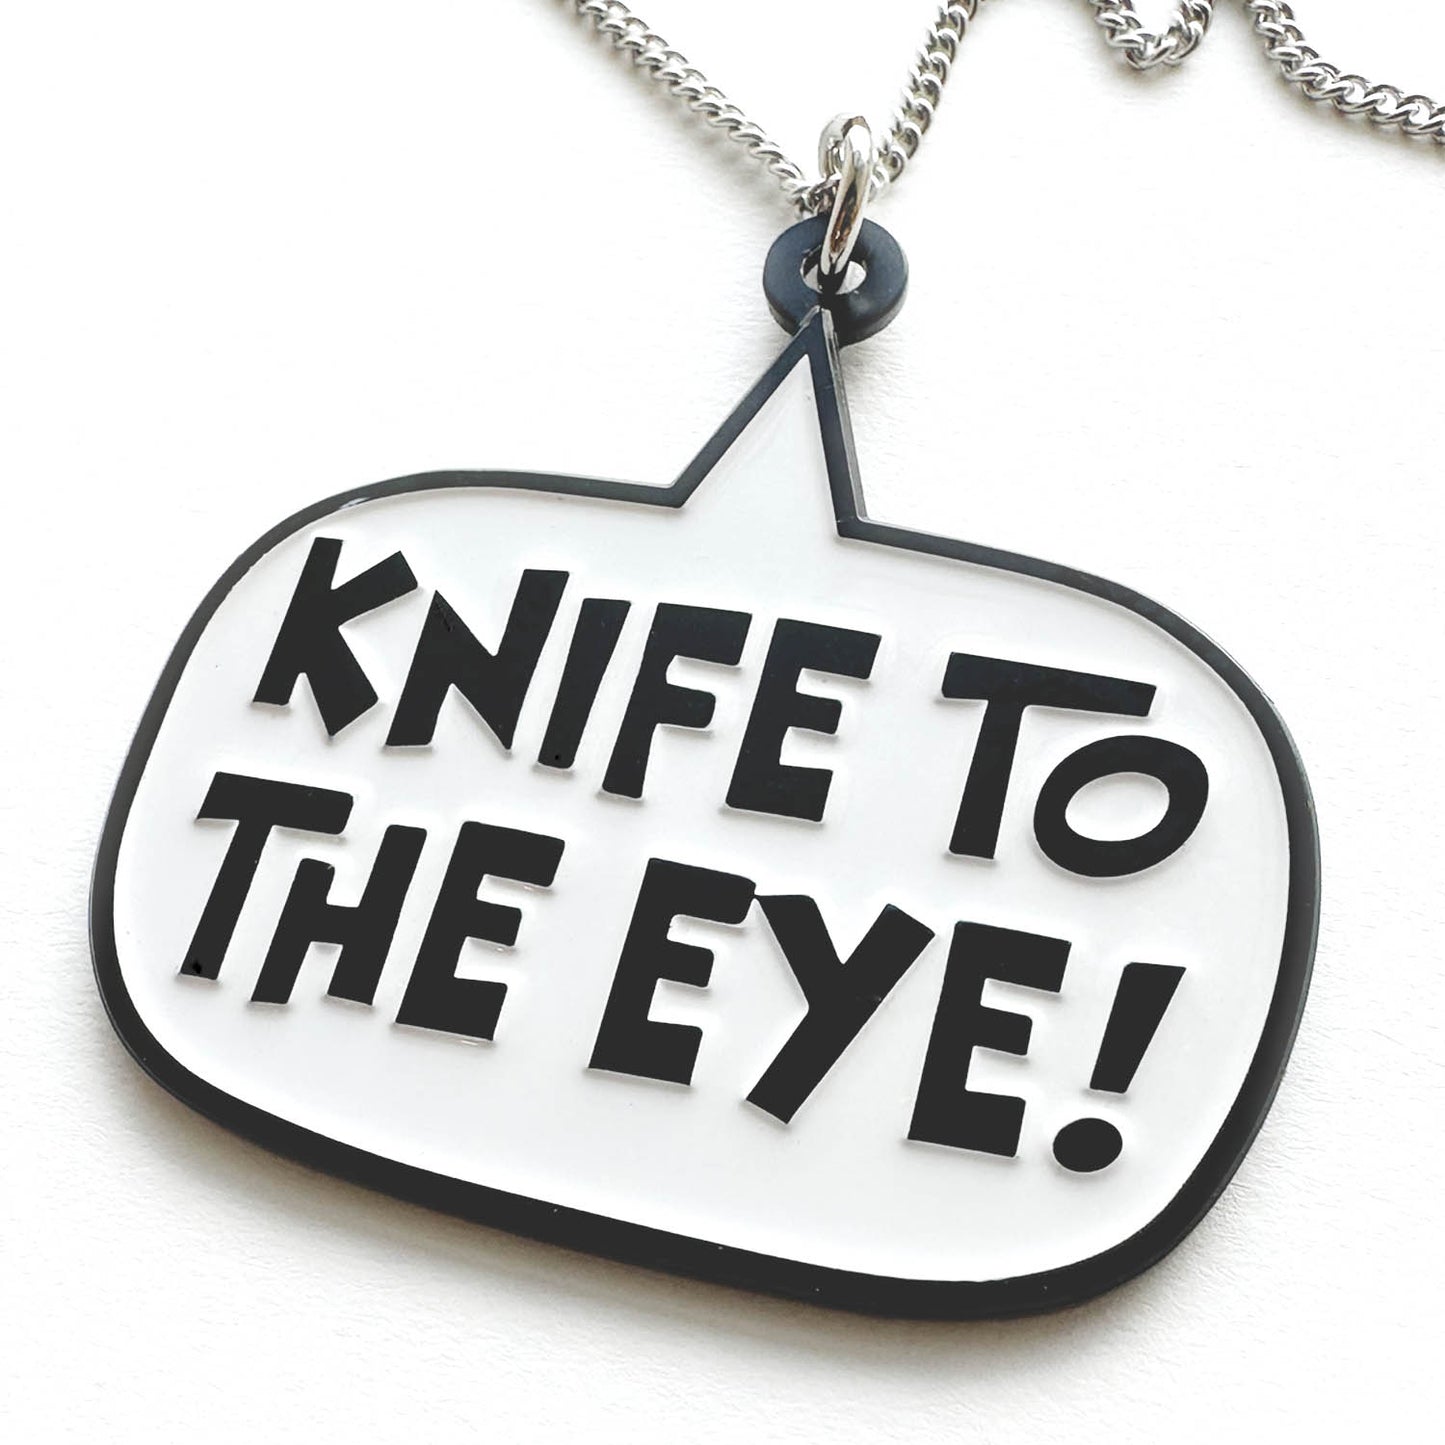 Goon "KNIFE TO THE EYE!" Necklace & Earring set